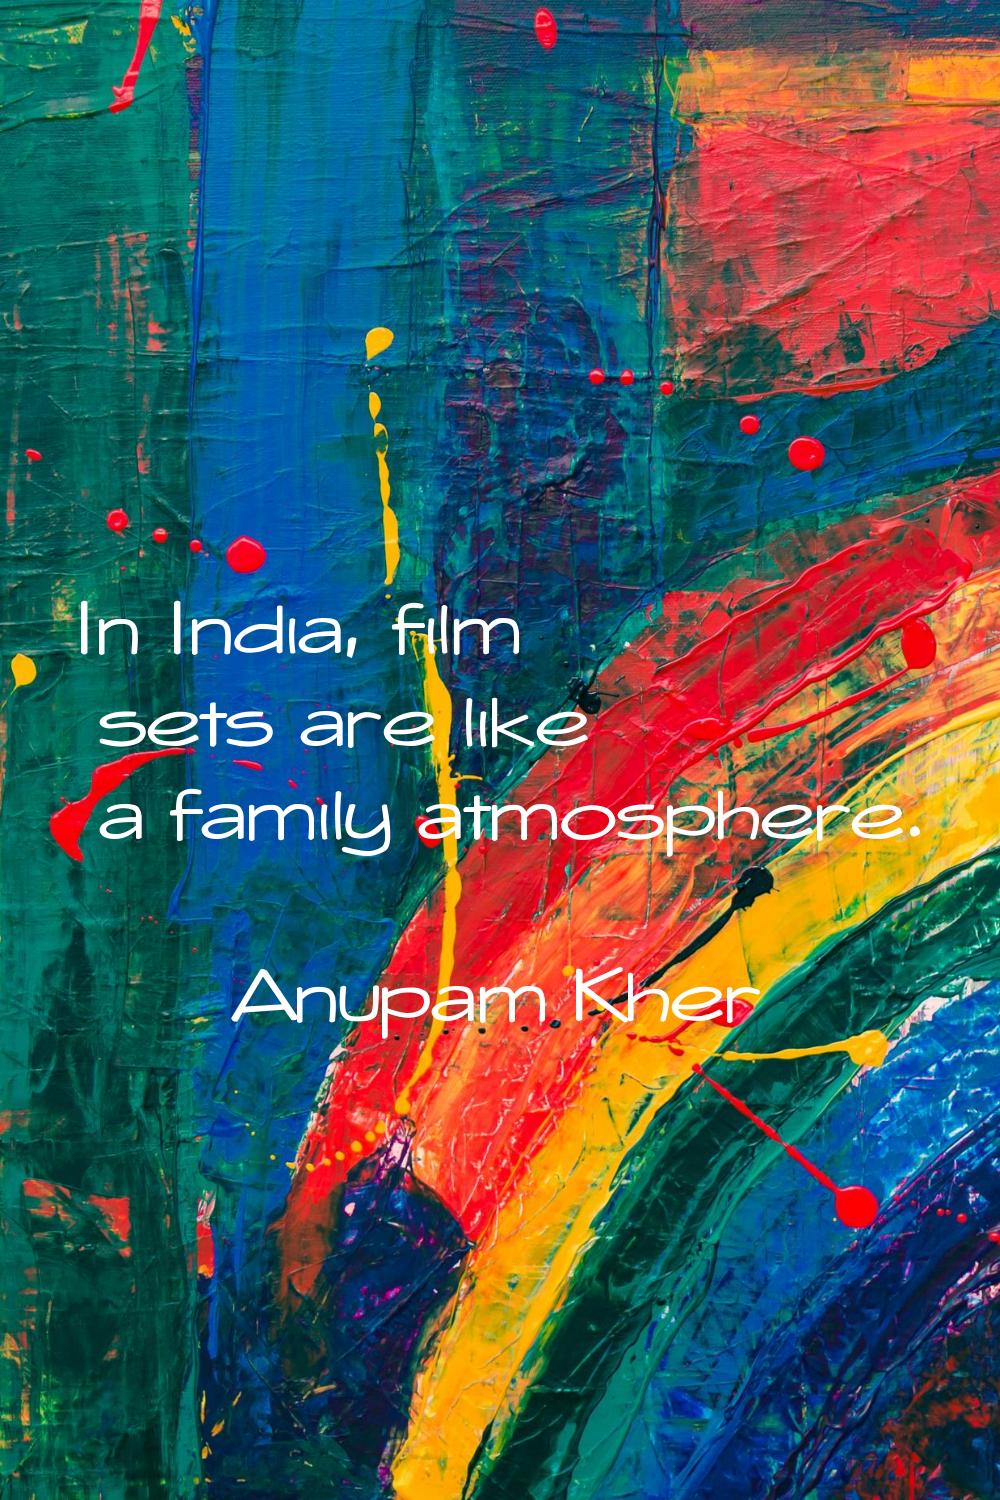 In India, film sets are like a family atmosphere.